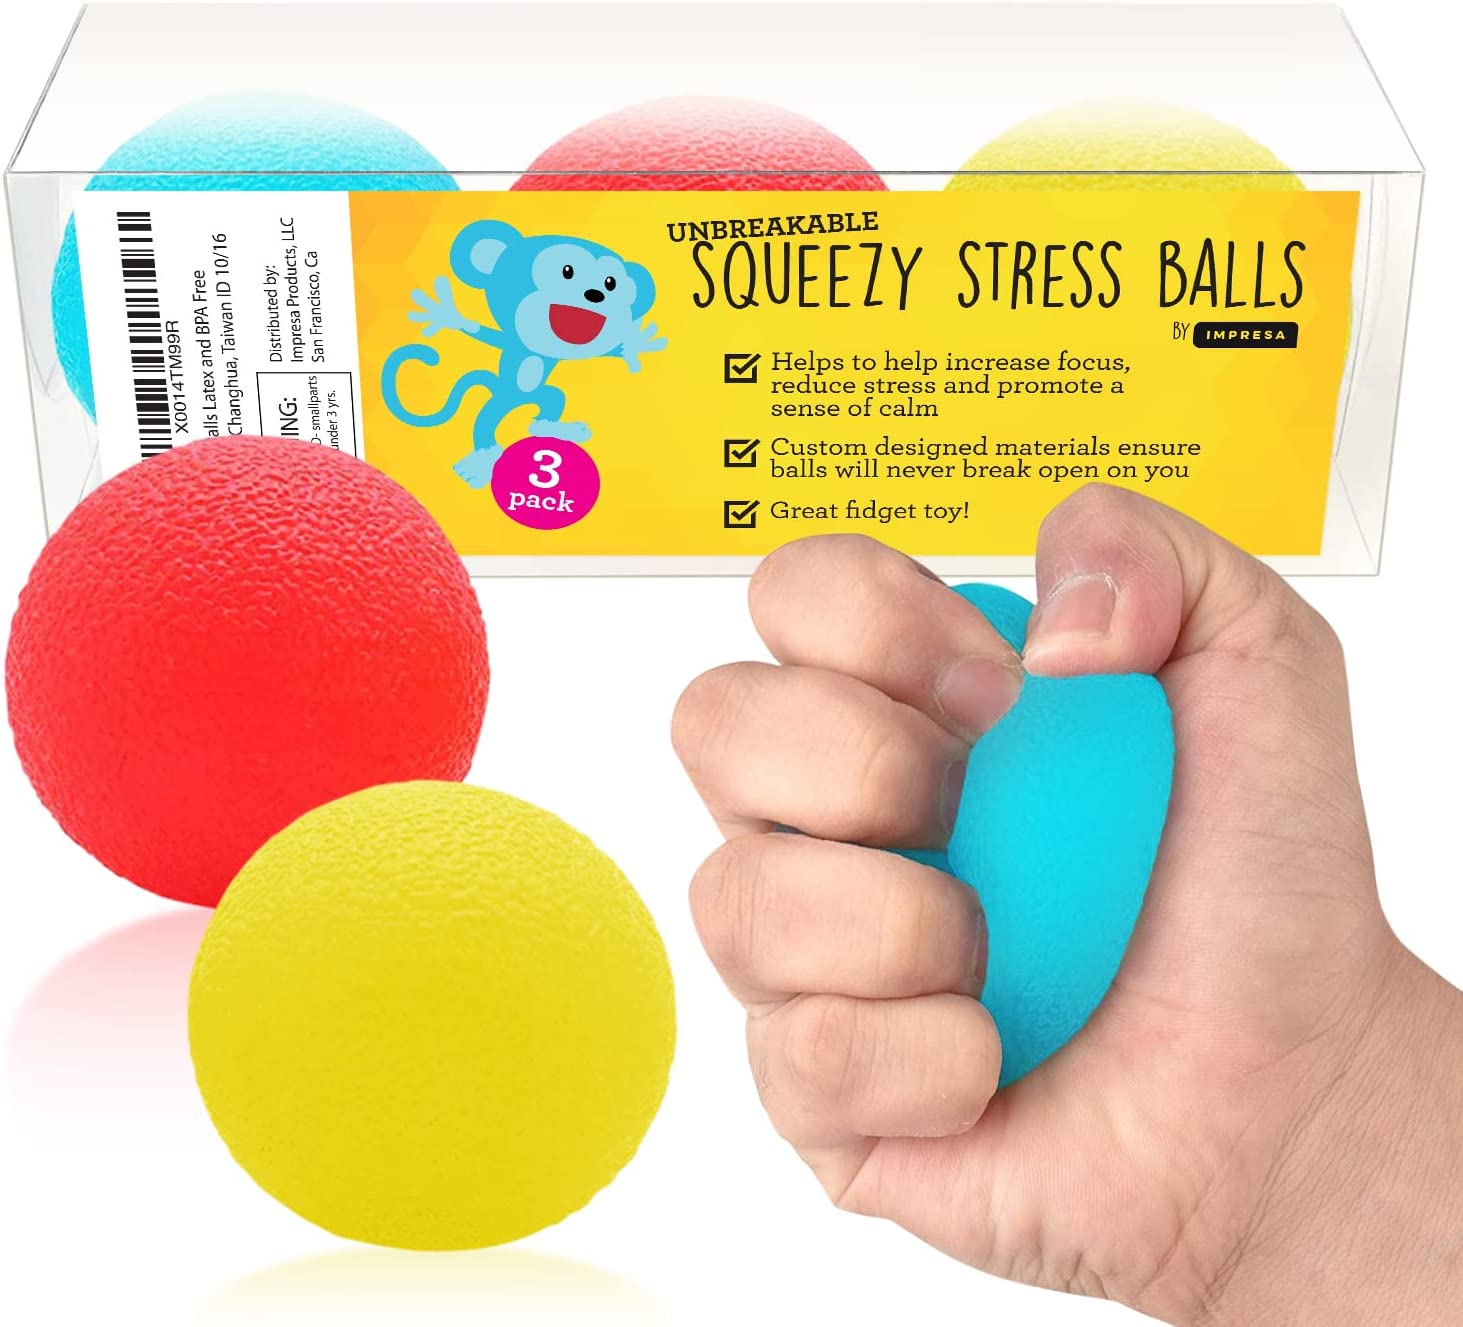 Stress Relief Balls (3-pack) - Tear-Resistant, Non-toxic, No BPA/Phthalate/Latex (Colors as Shown) - Ideal for Kids and Adults - Squishy Relief Toys to Help Anxiety, ADHD, Autism and More - By IMPRESA